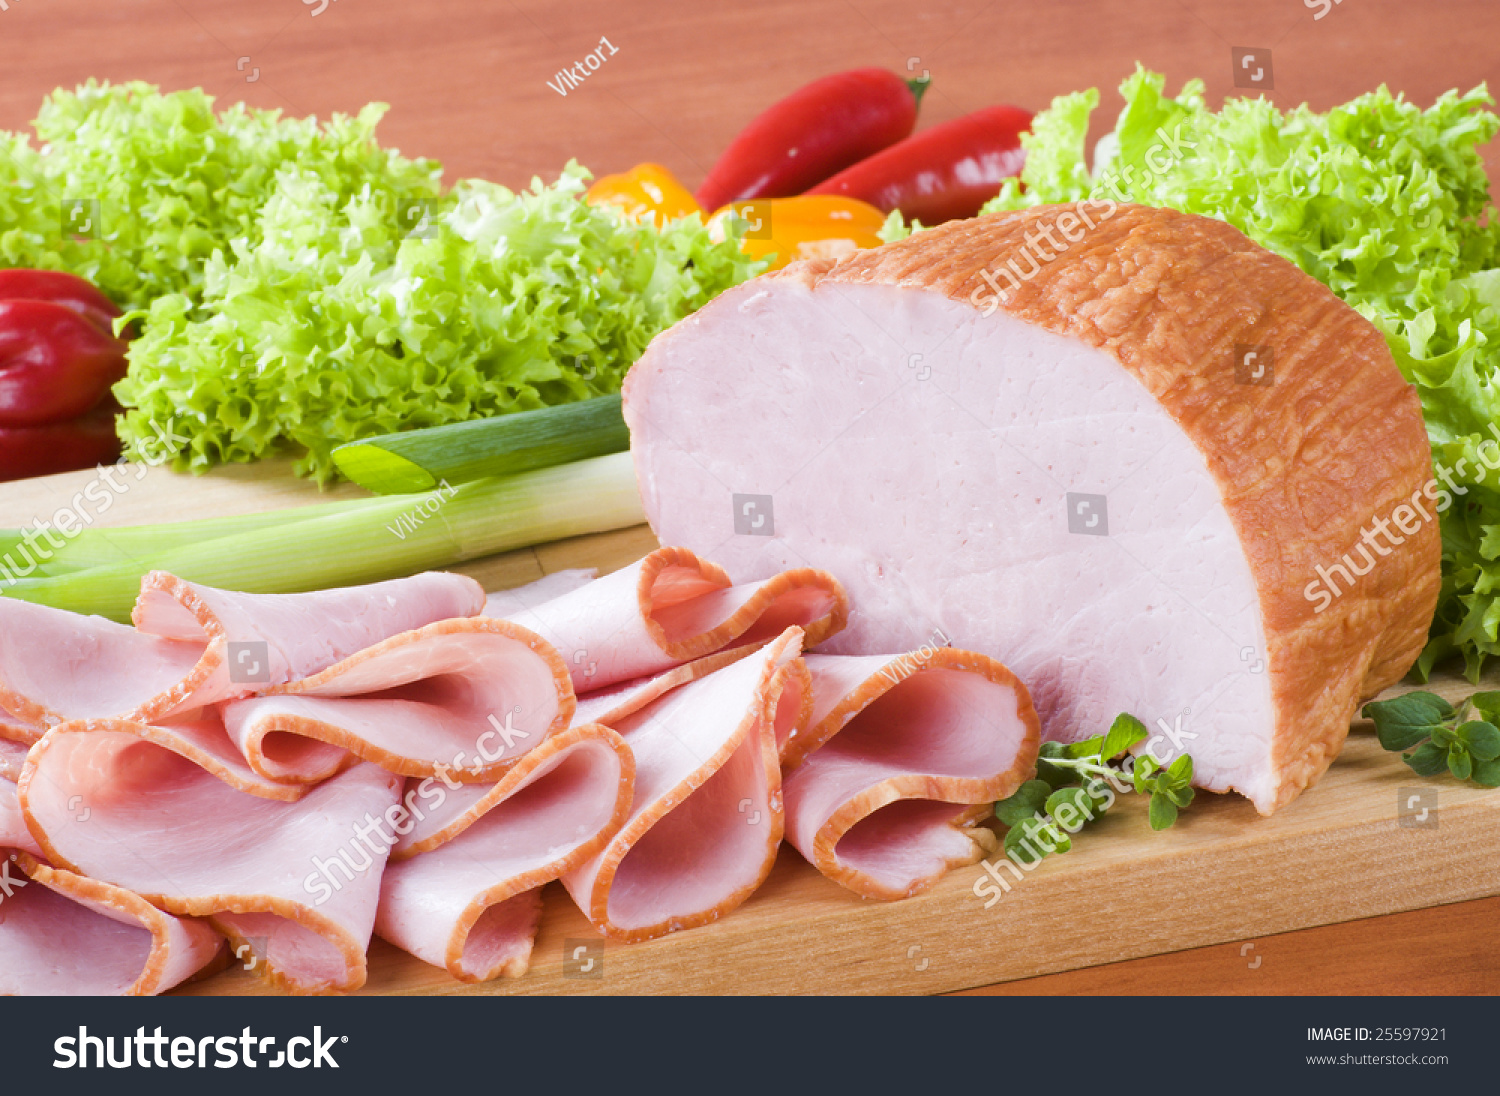 Detail View Of Slices Of Pink Smoked Ham Stock Photo 25597921 ...